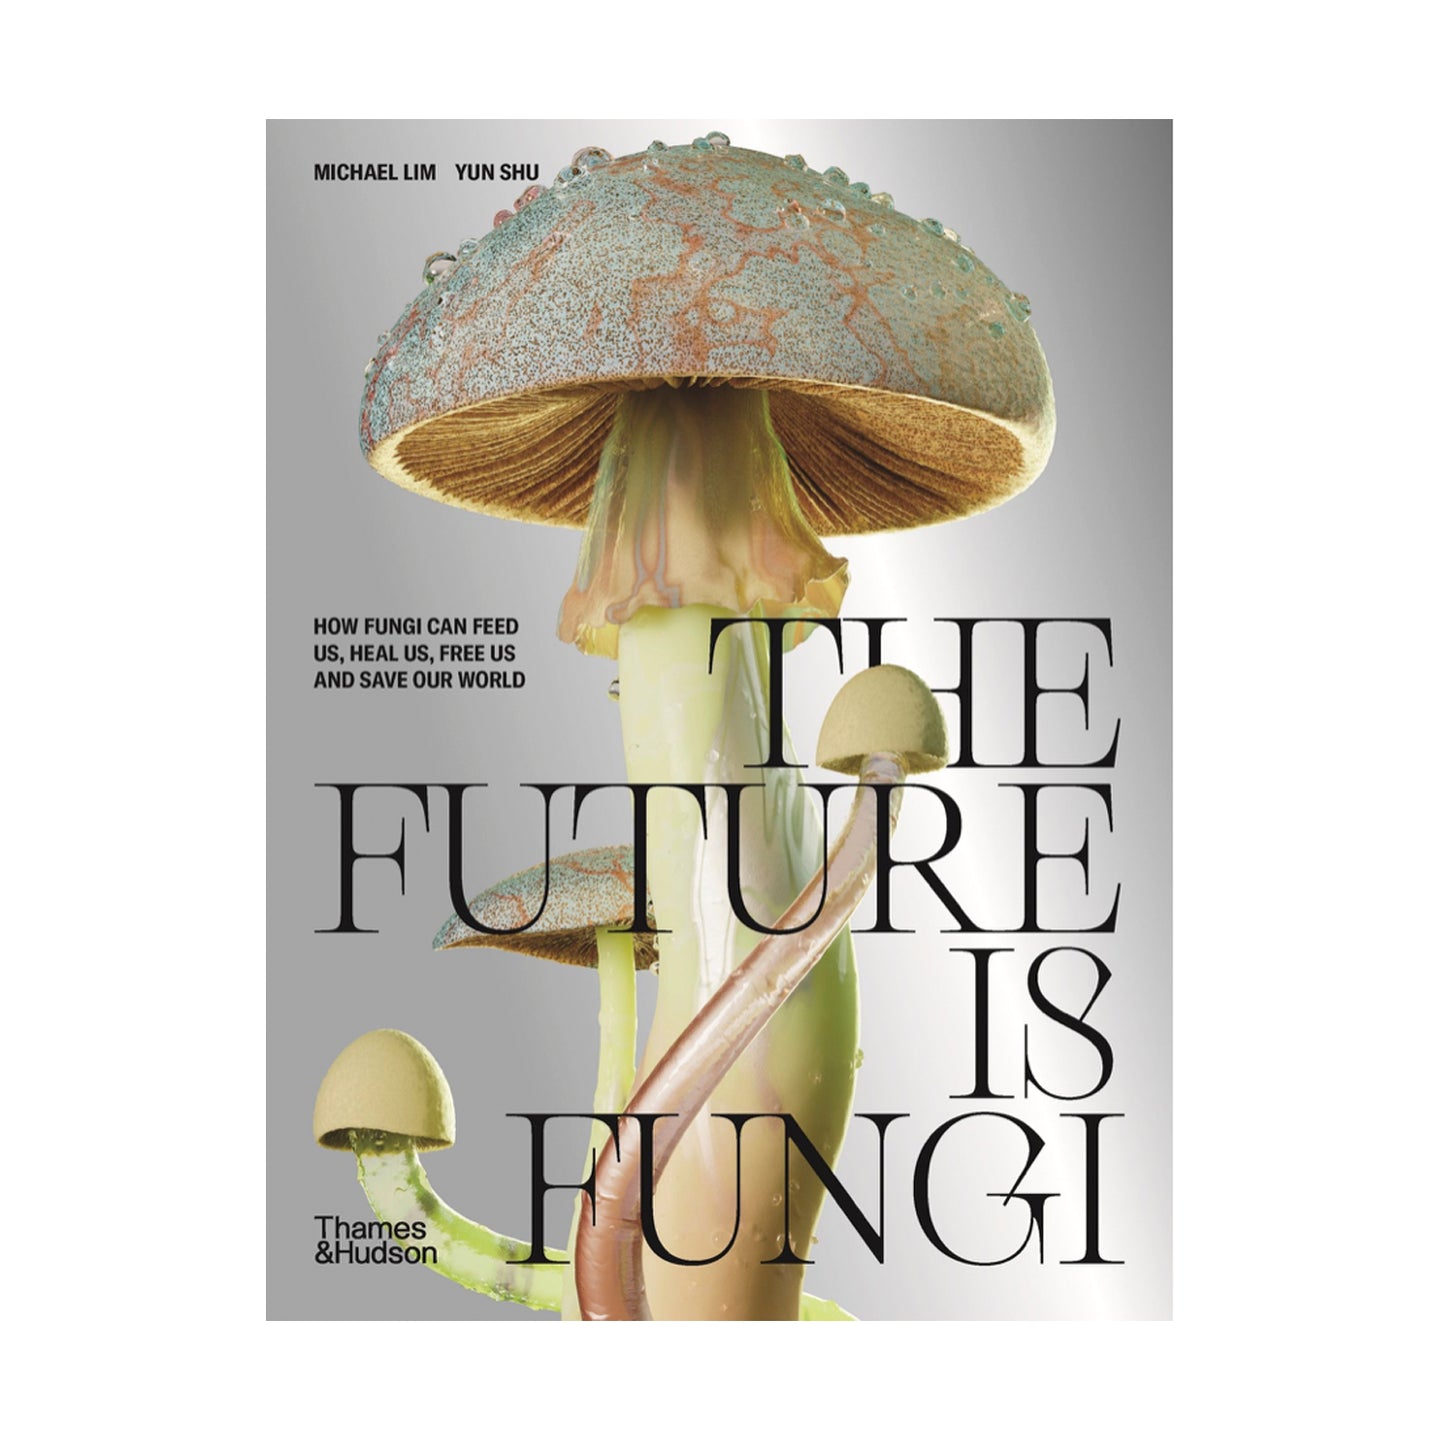 The Future Is Fungi I How Fungi Can Feed Us, Heal Us, Free Us and Save Our World